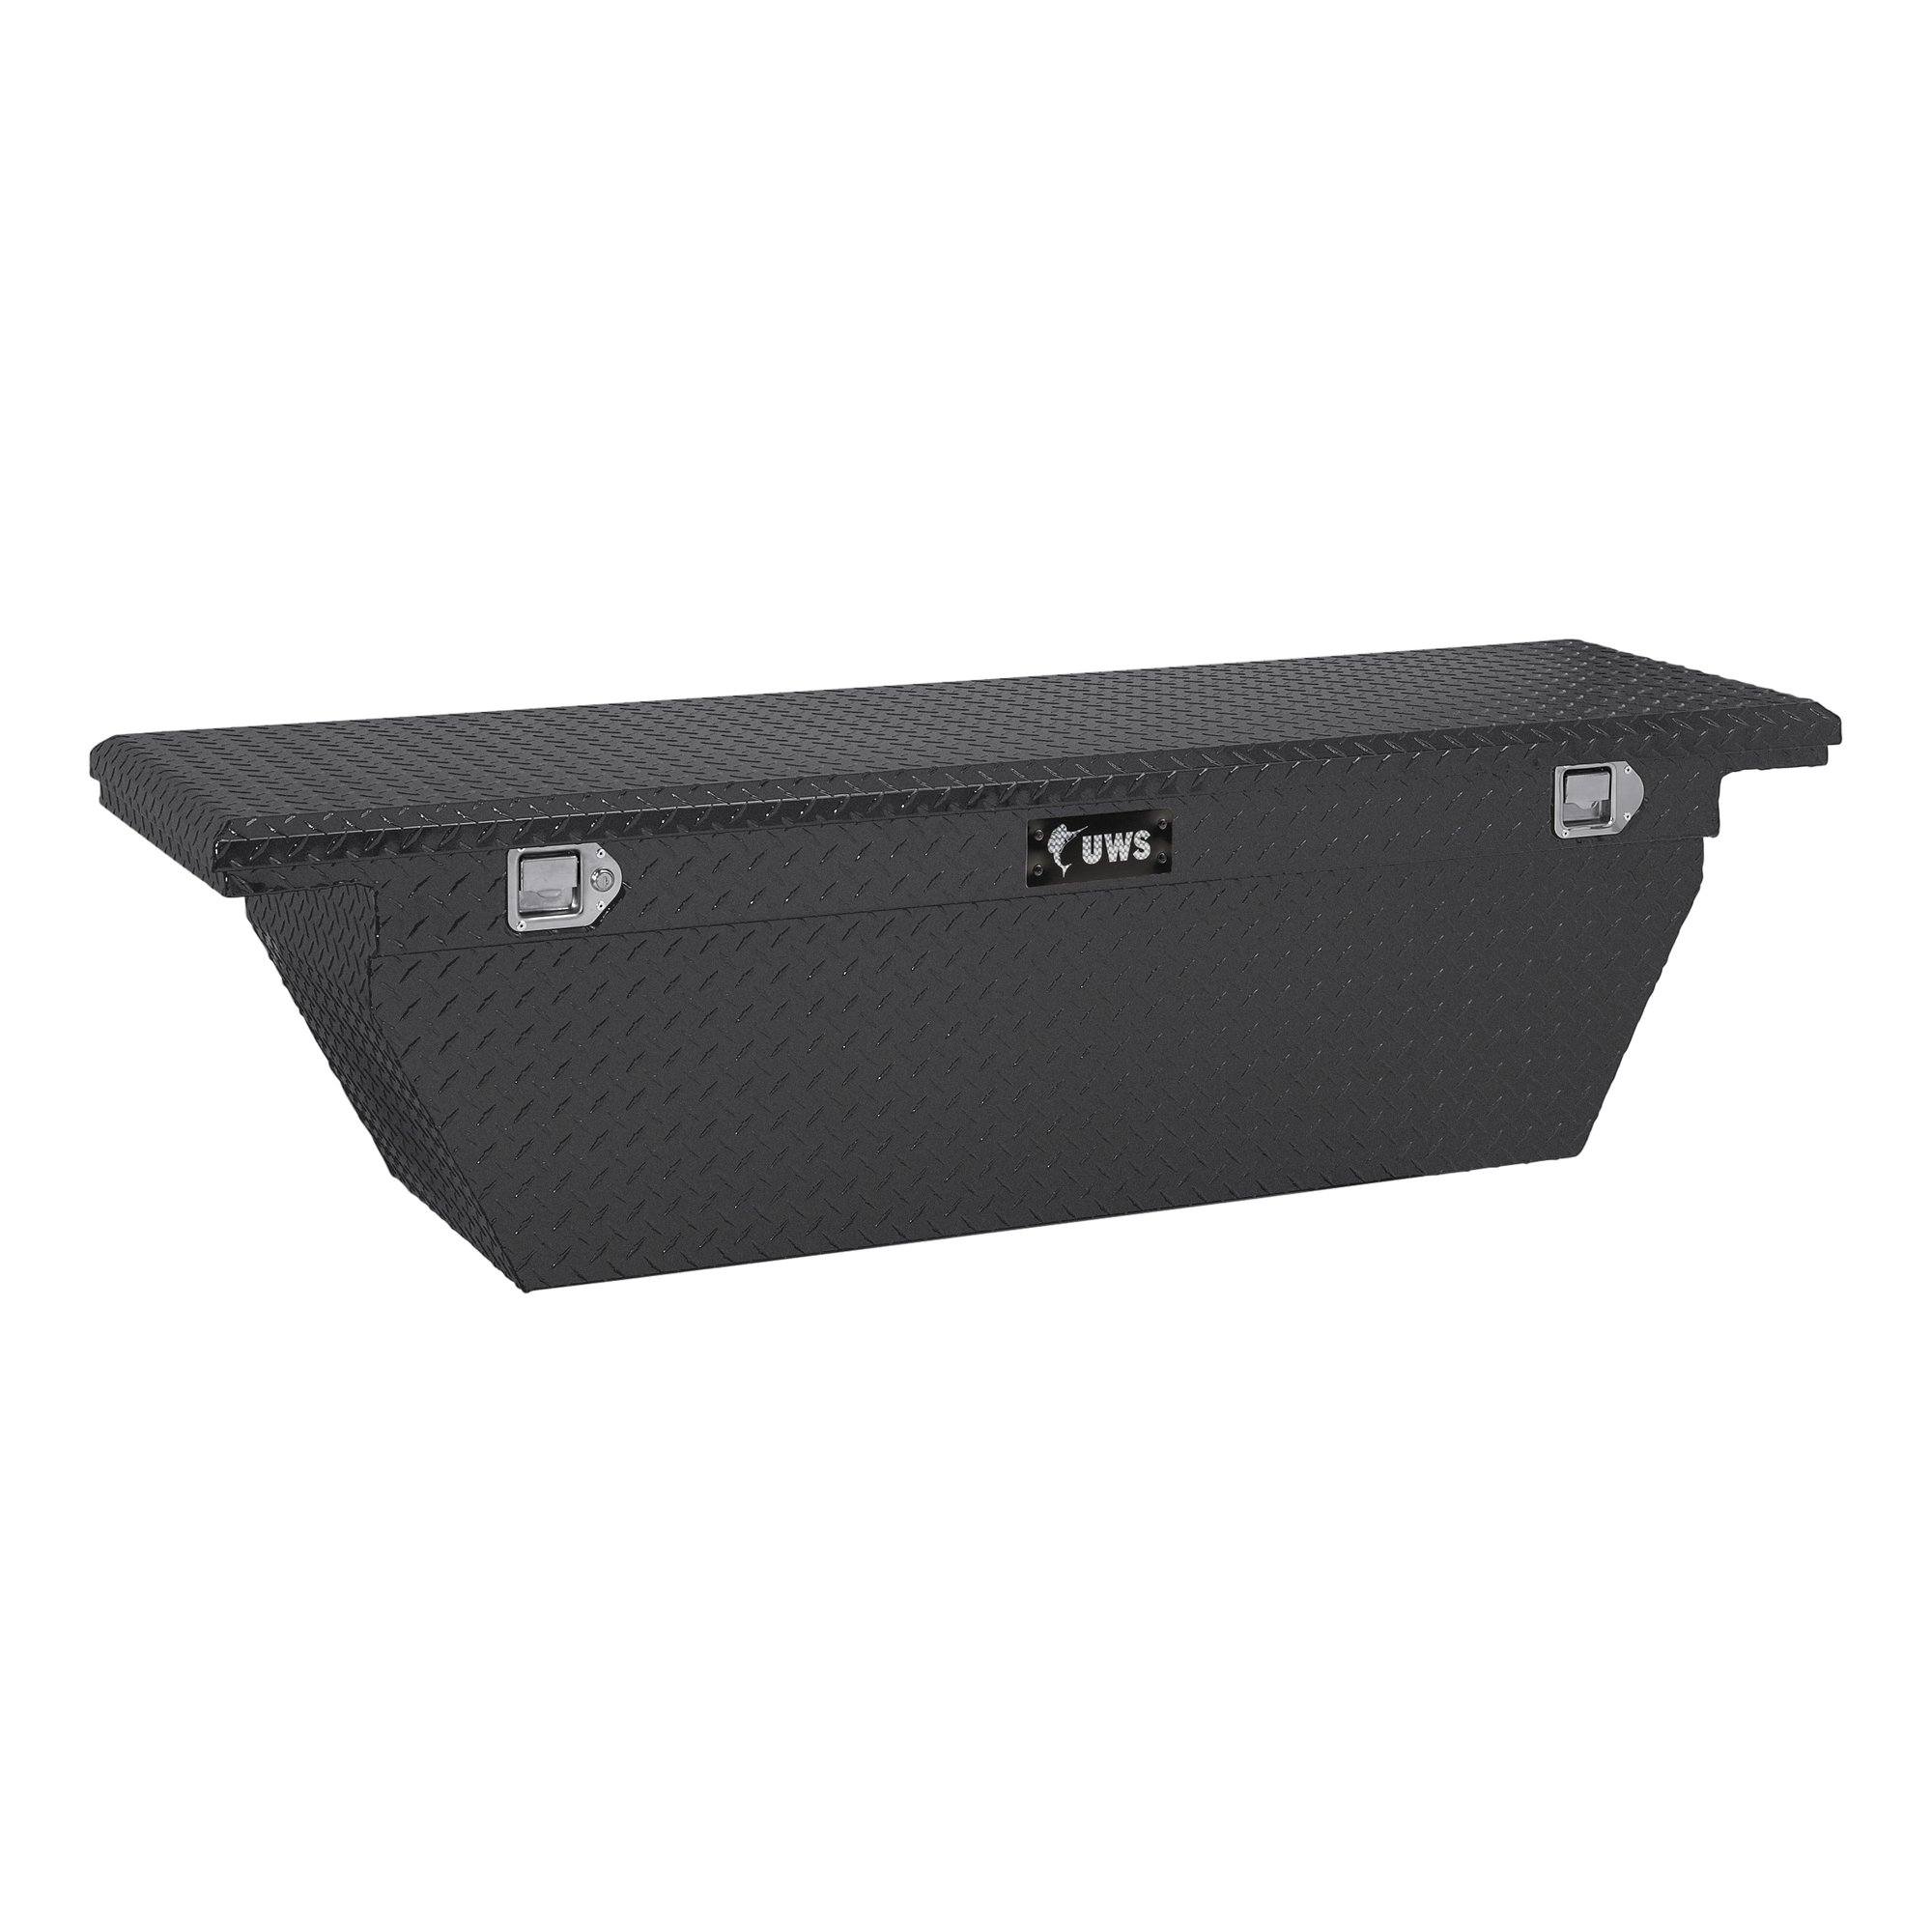 UWS, 69Inch Angled Crossover Truck Tool Box, Width 69.875 in, Material Aluminum, Color Finish Matte Black, Model EC10783